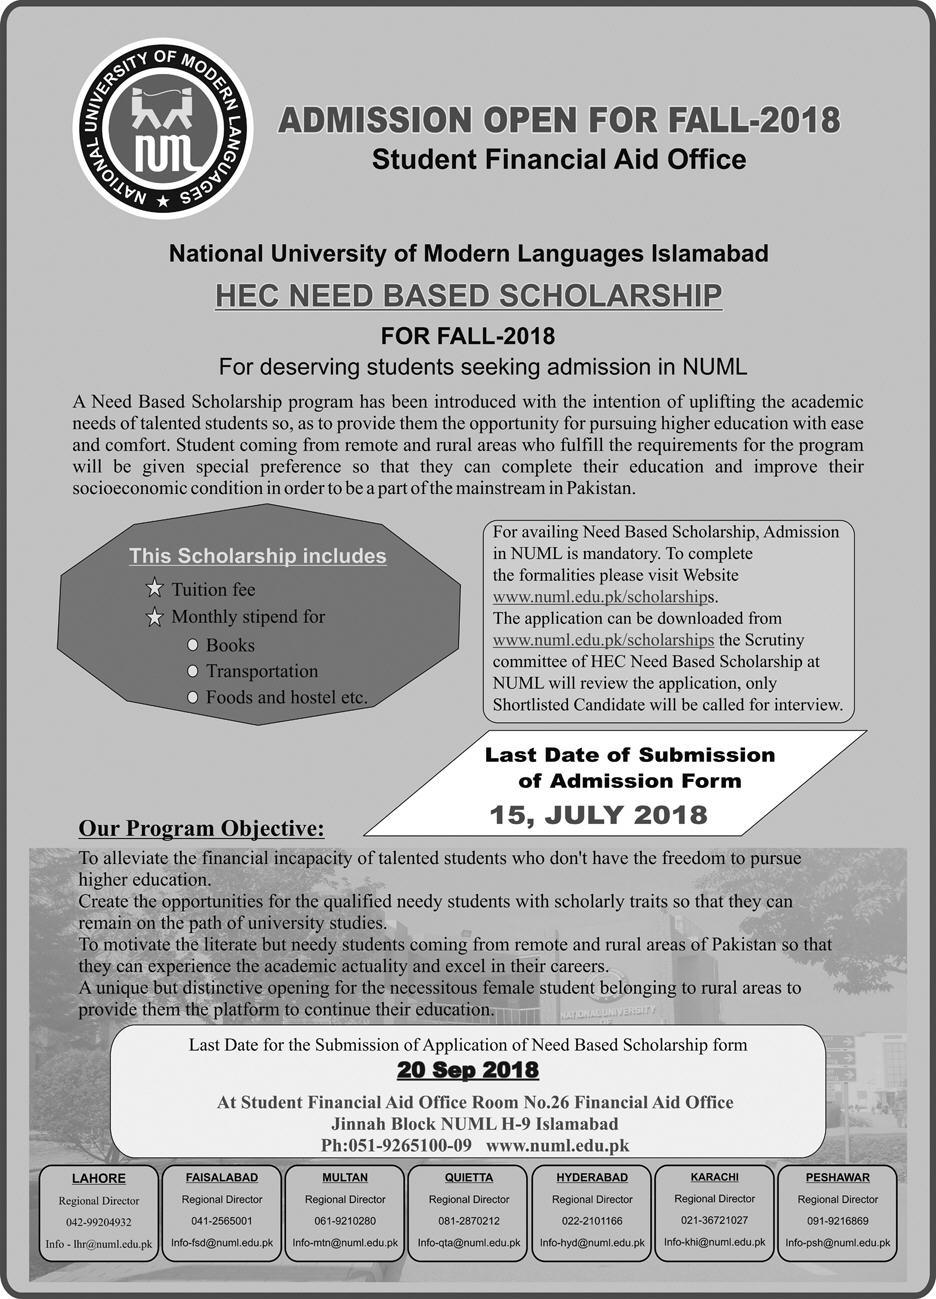 HEC Need Based Scholarship for Students of NUML Fall 2018